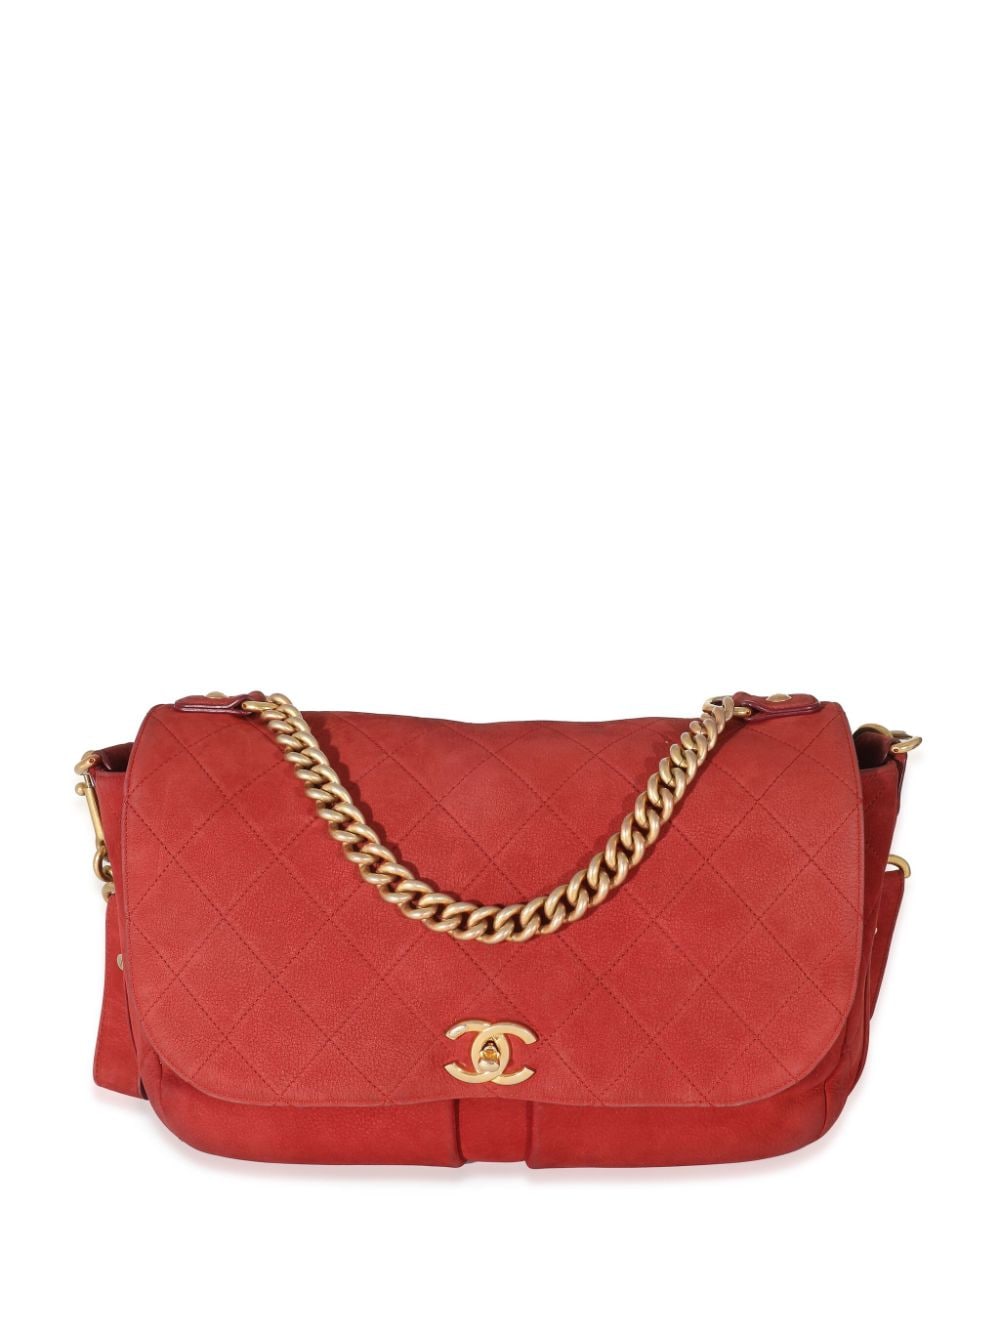 Pre-owned Chanel 2016-2017 Paris In Rome Shoulder Bag In Red